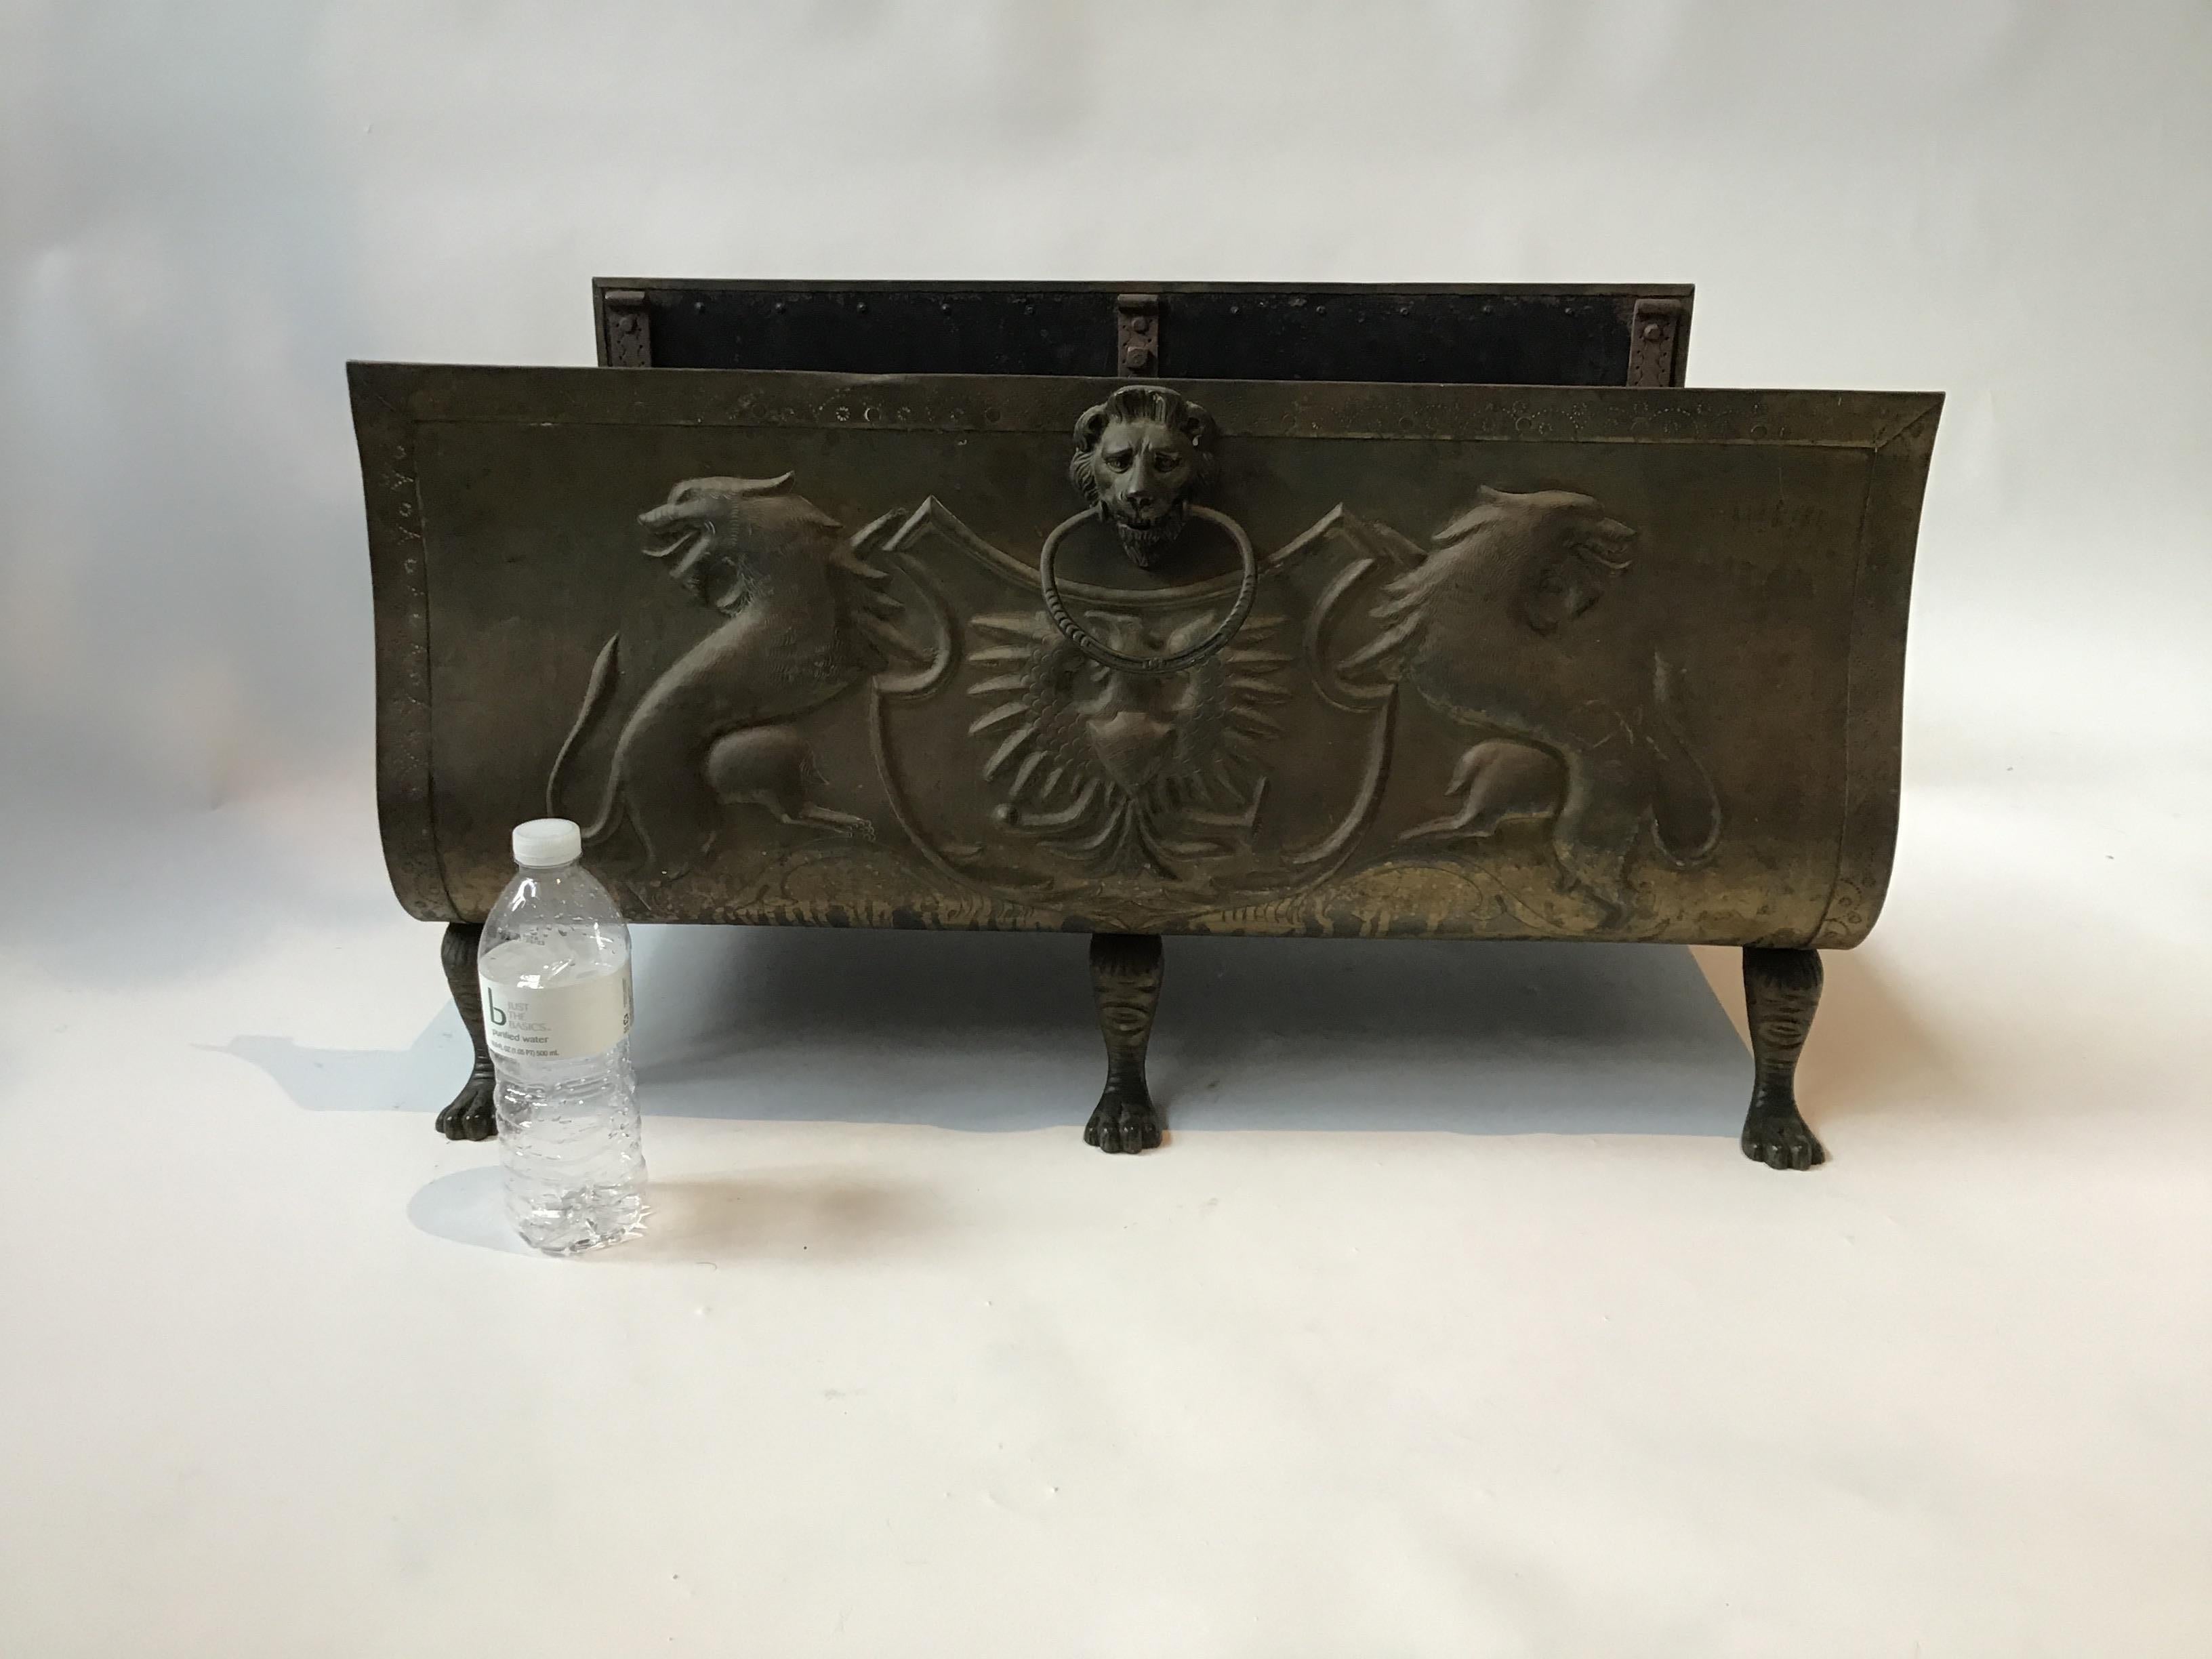 1870s English Brass Large Log Holder For Fireplace 5